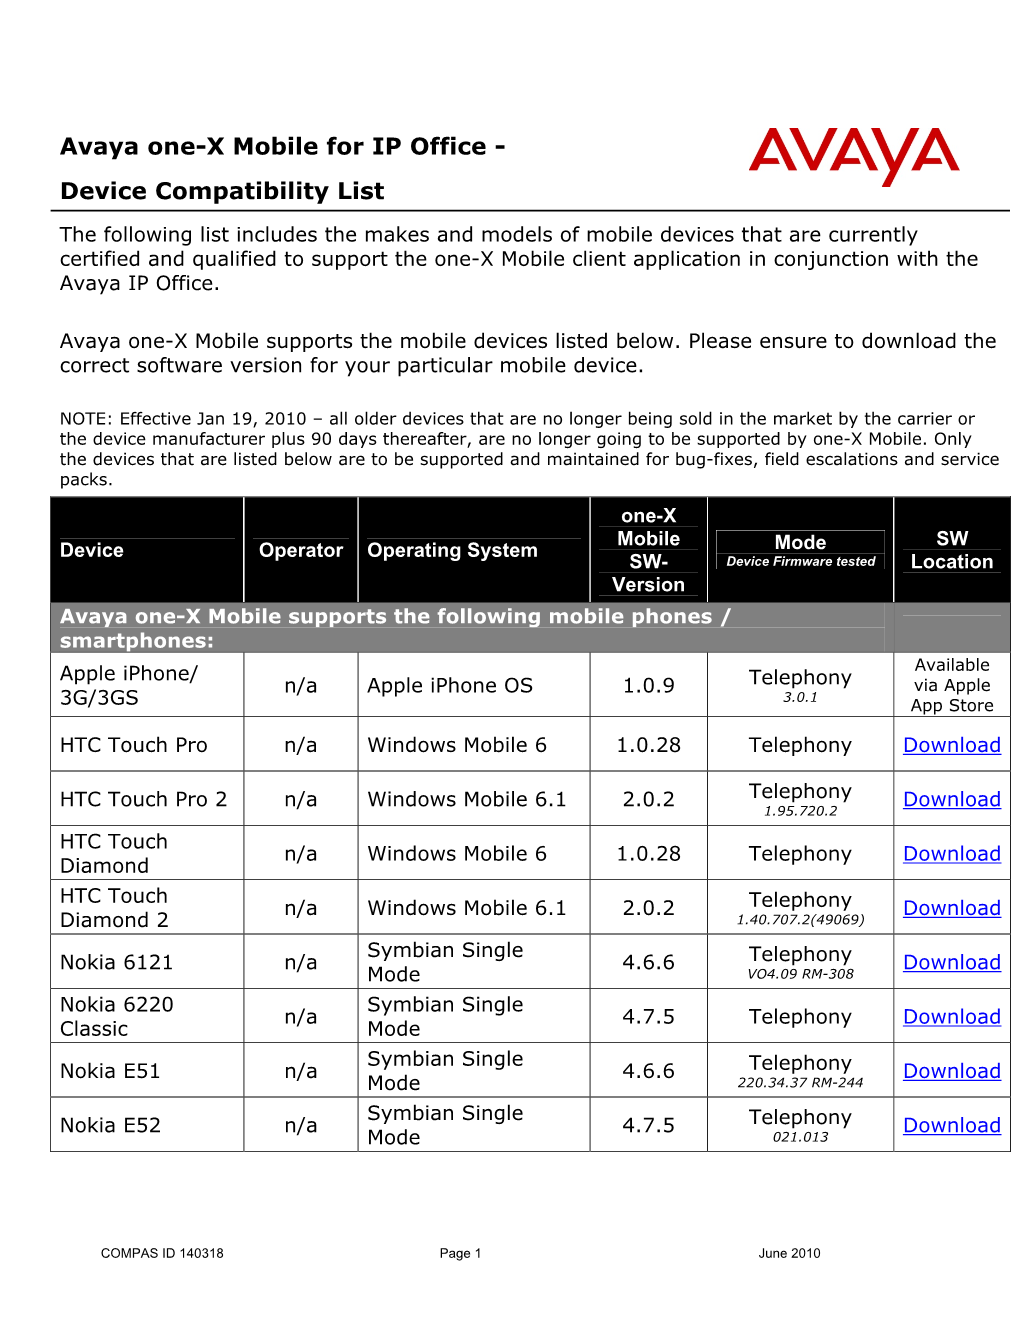 Device Compatibility List